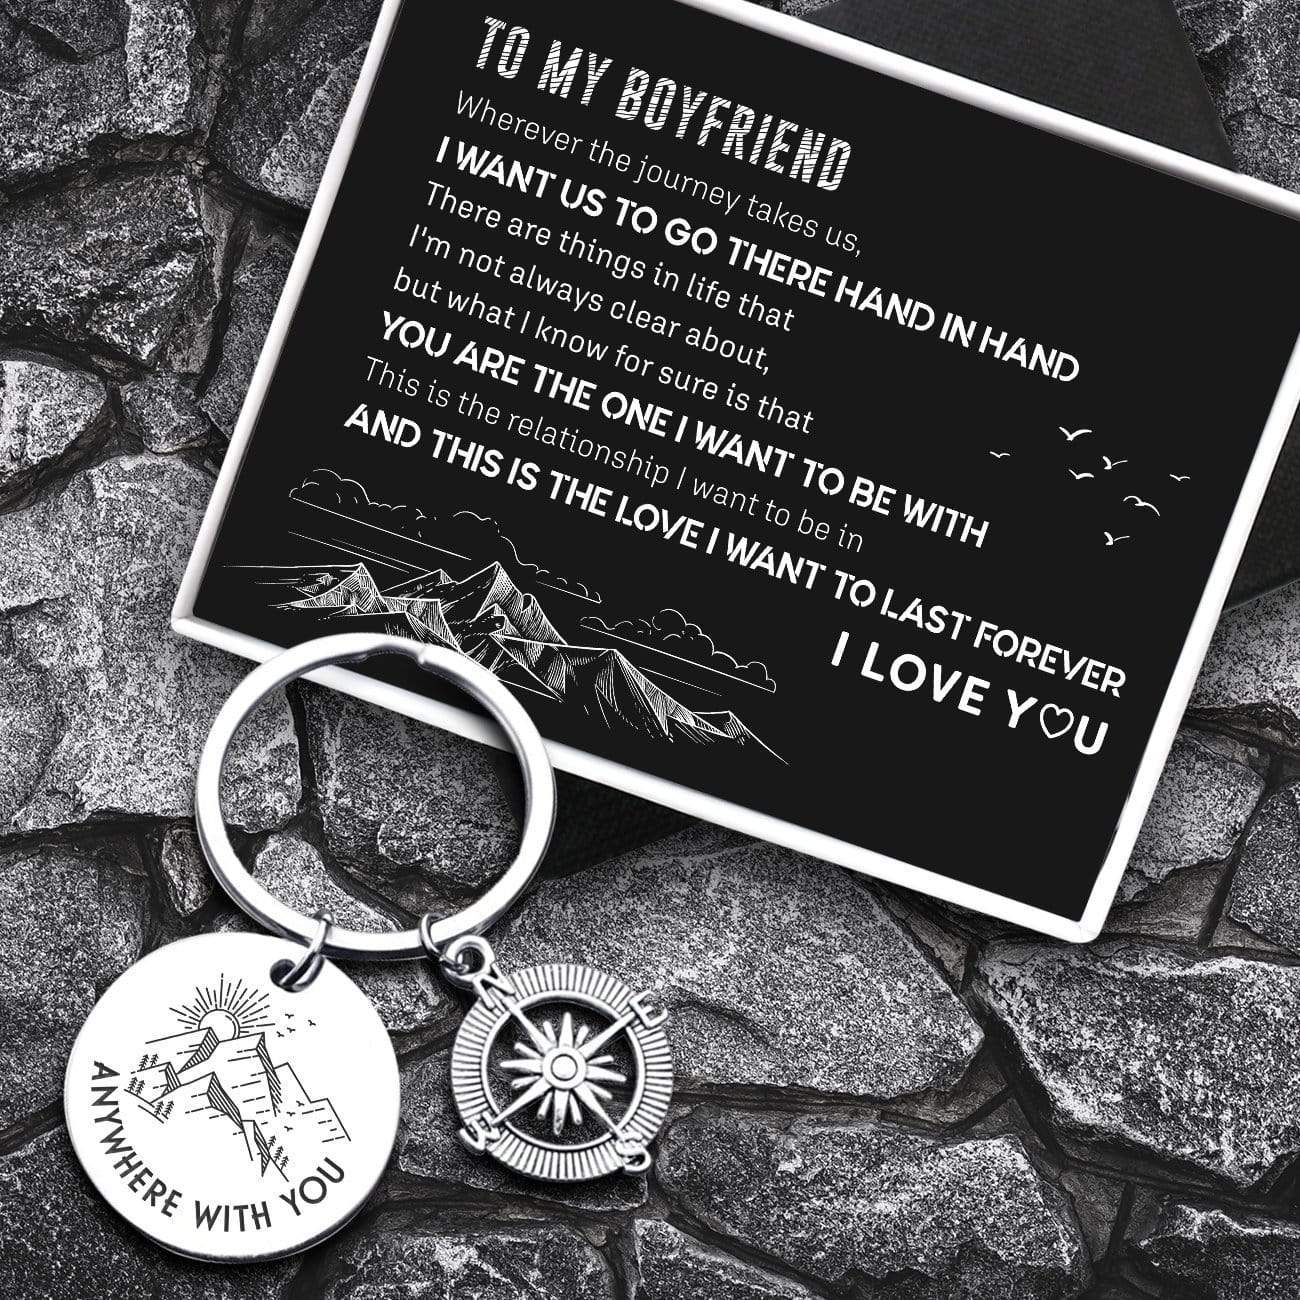 Compass Keychain - Travel - To My Boyfriend - I Want Us To Go There Hand In Hand - Gkw12001